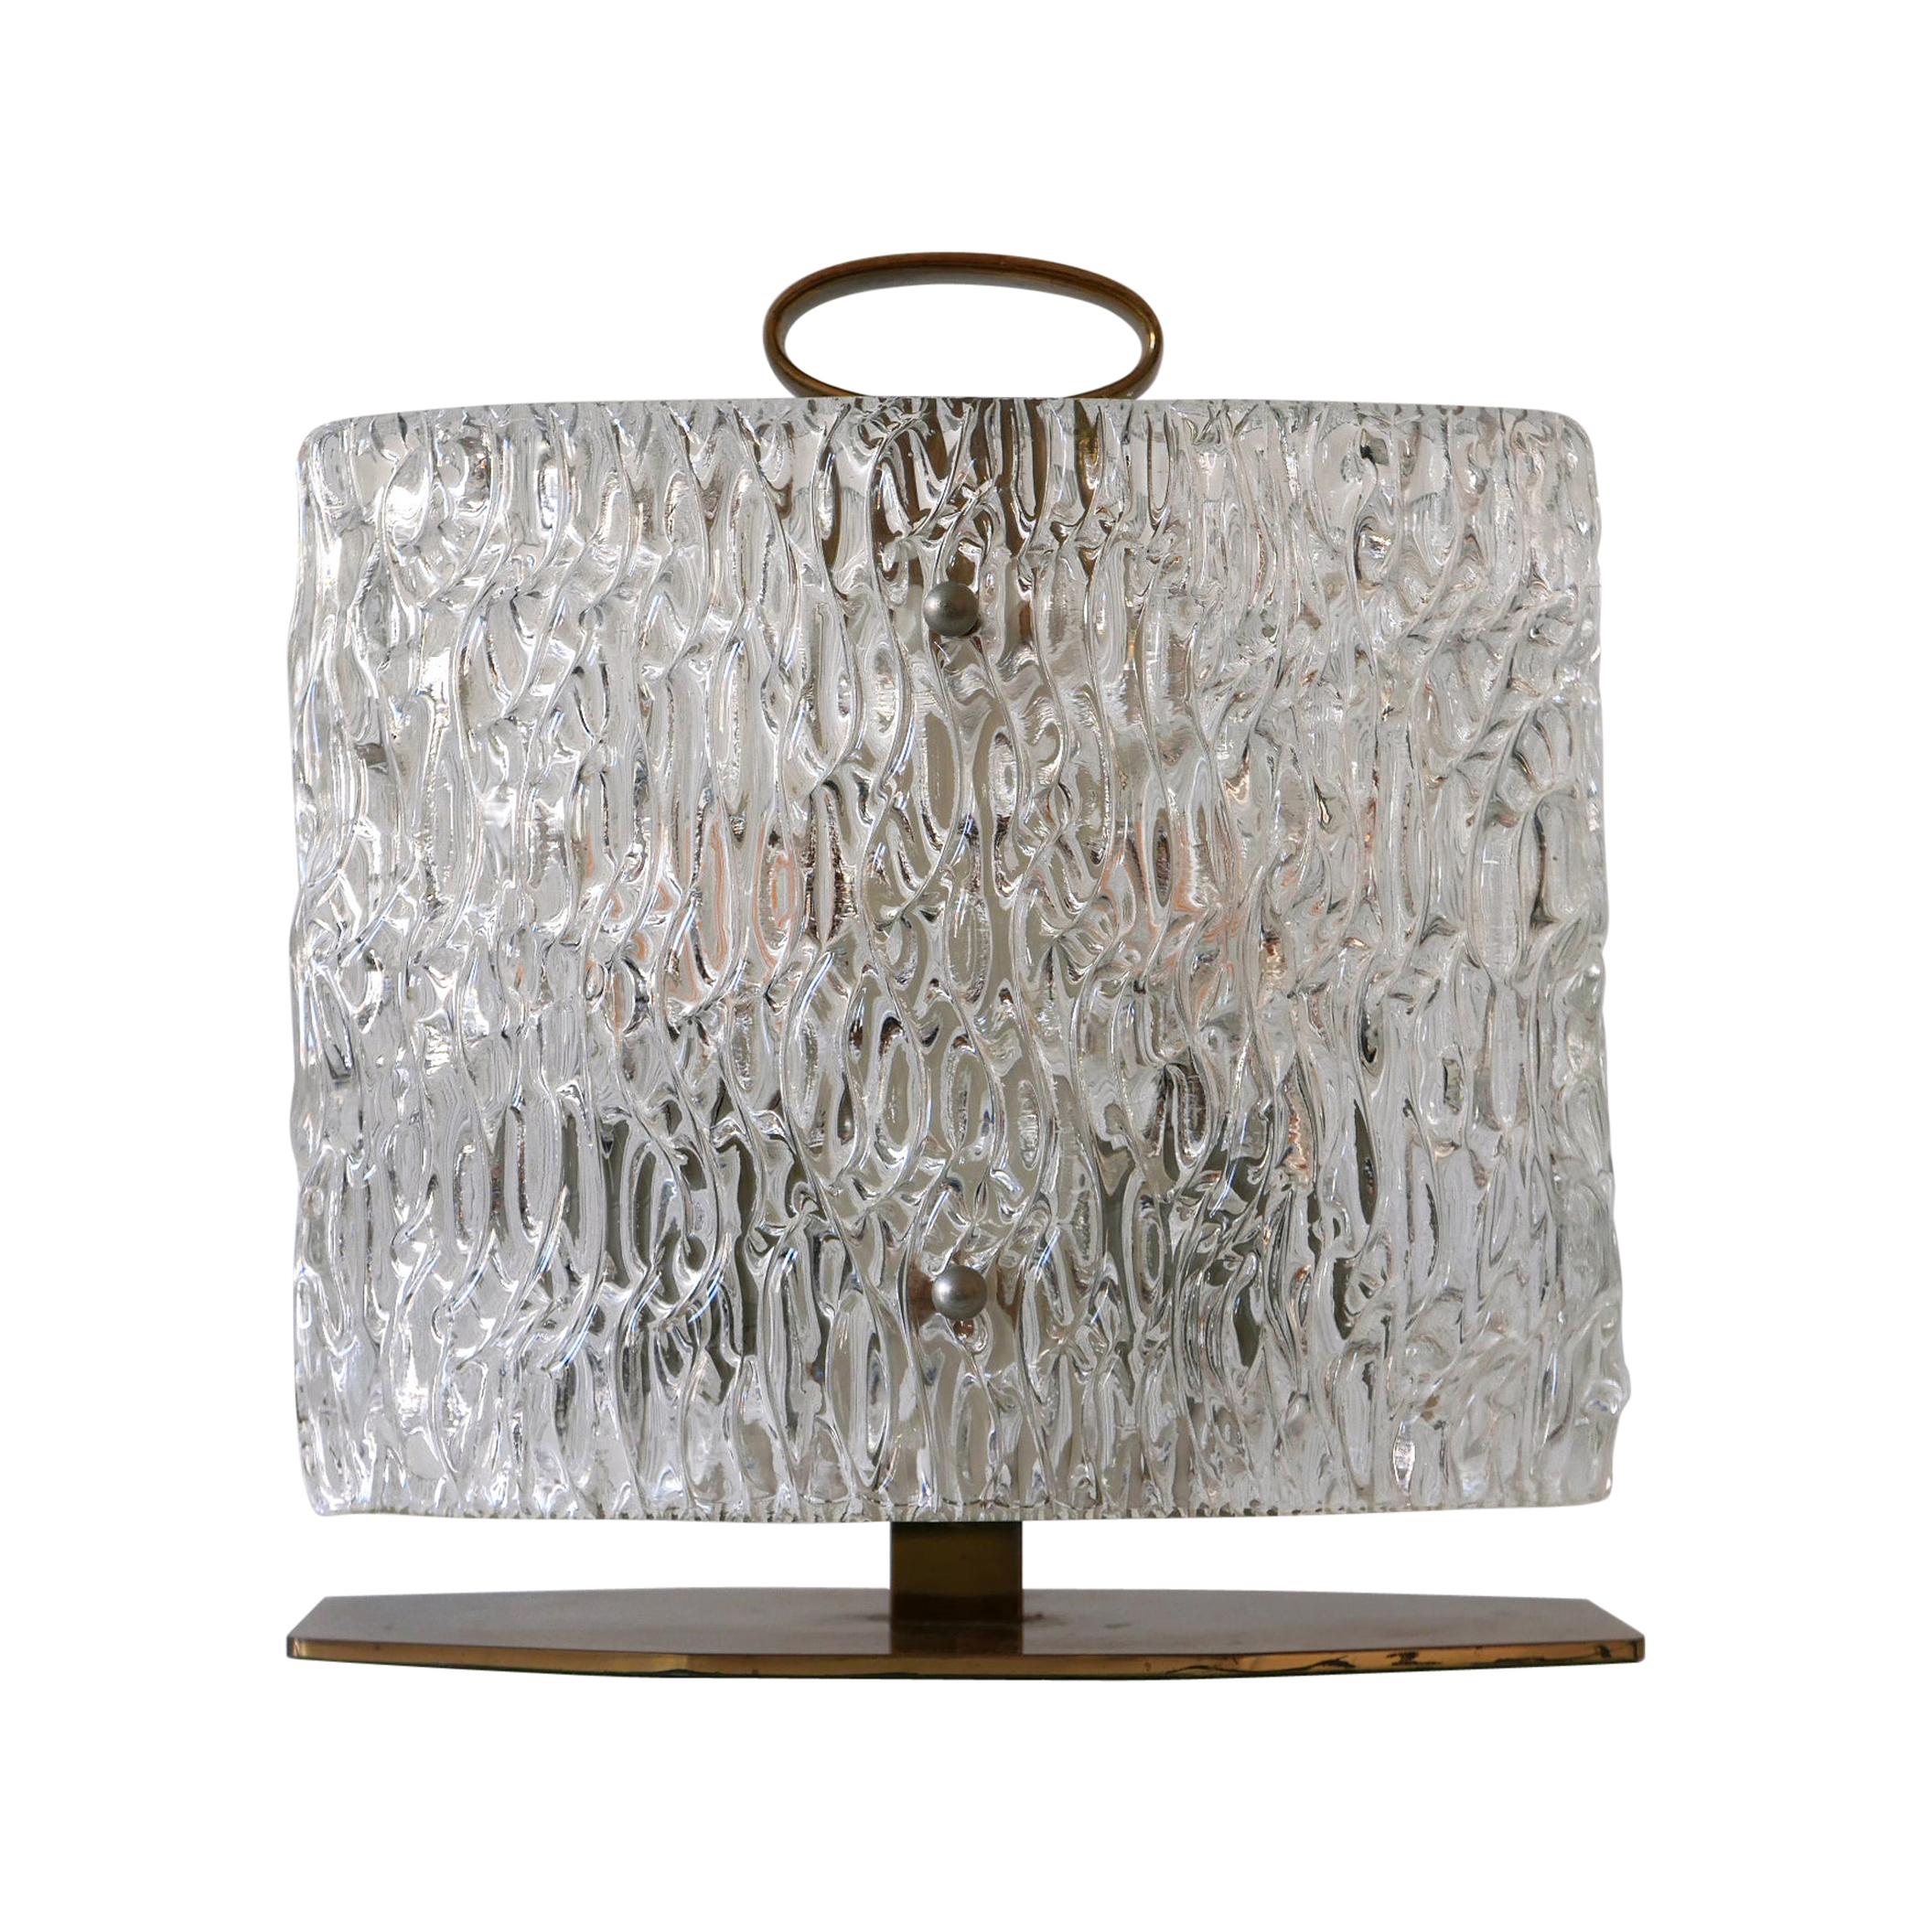 Exceptional Mid-Century Modern Table Lamp with Ice Glass Shade, 1950s, Italy For Sale